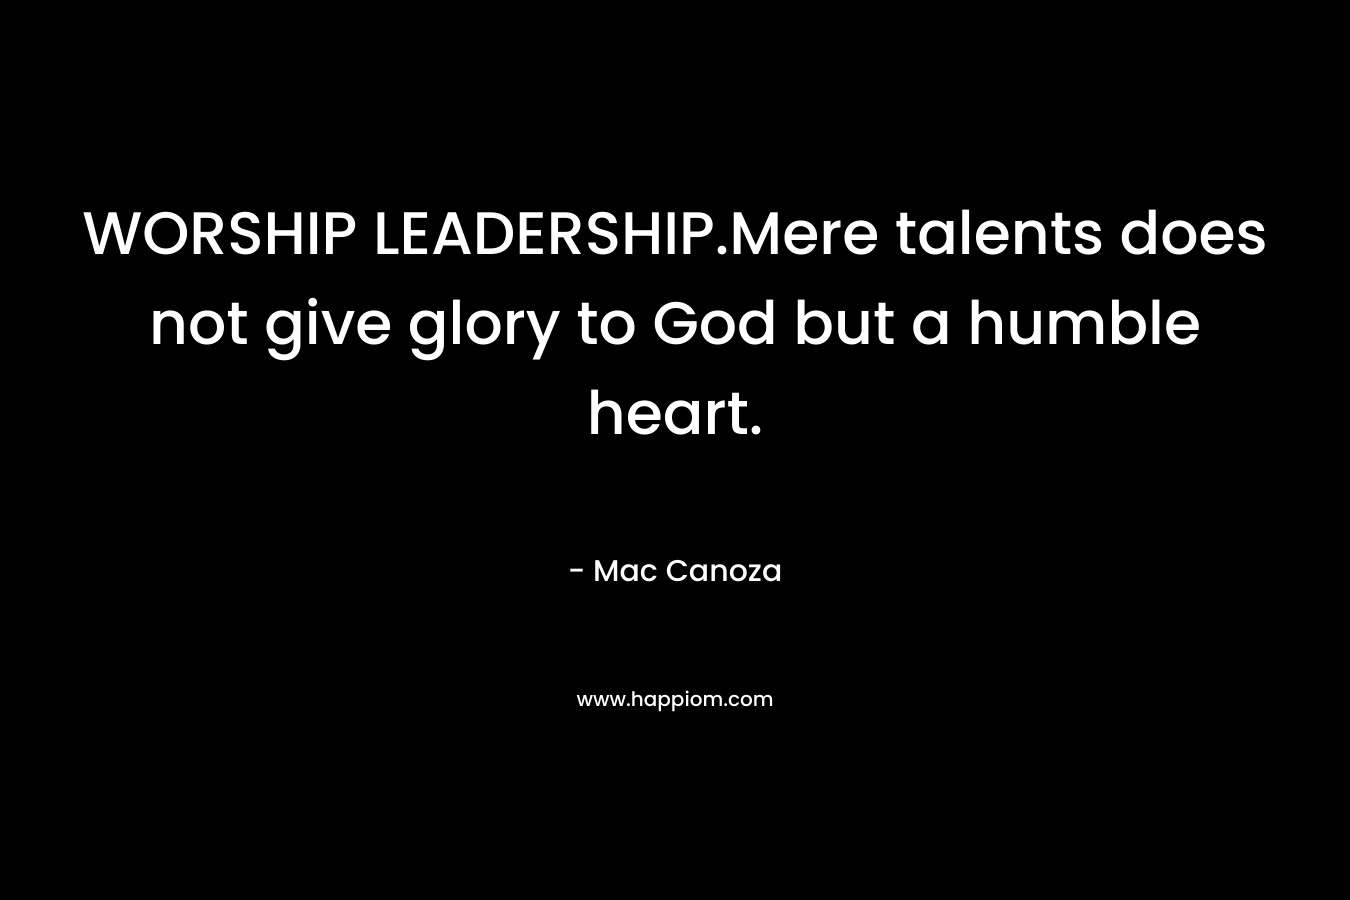 WORSHIP LEADERSHIP.Mere talents does not give glory to God but a humble heart. – Mac Canoza